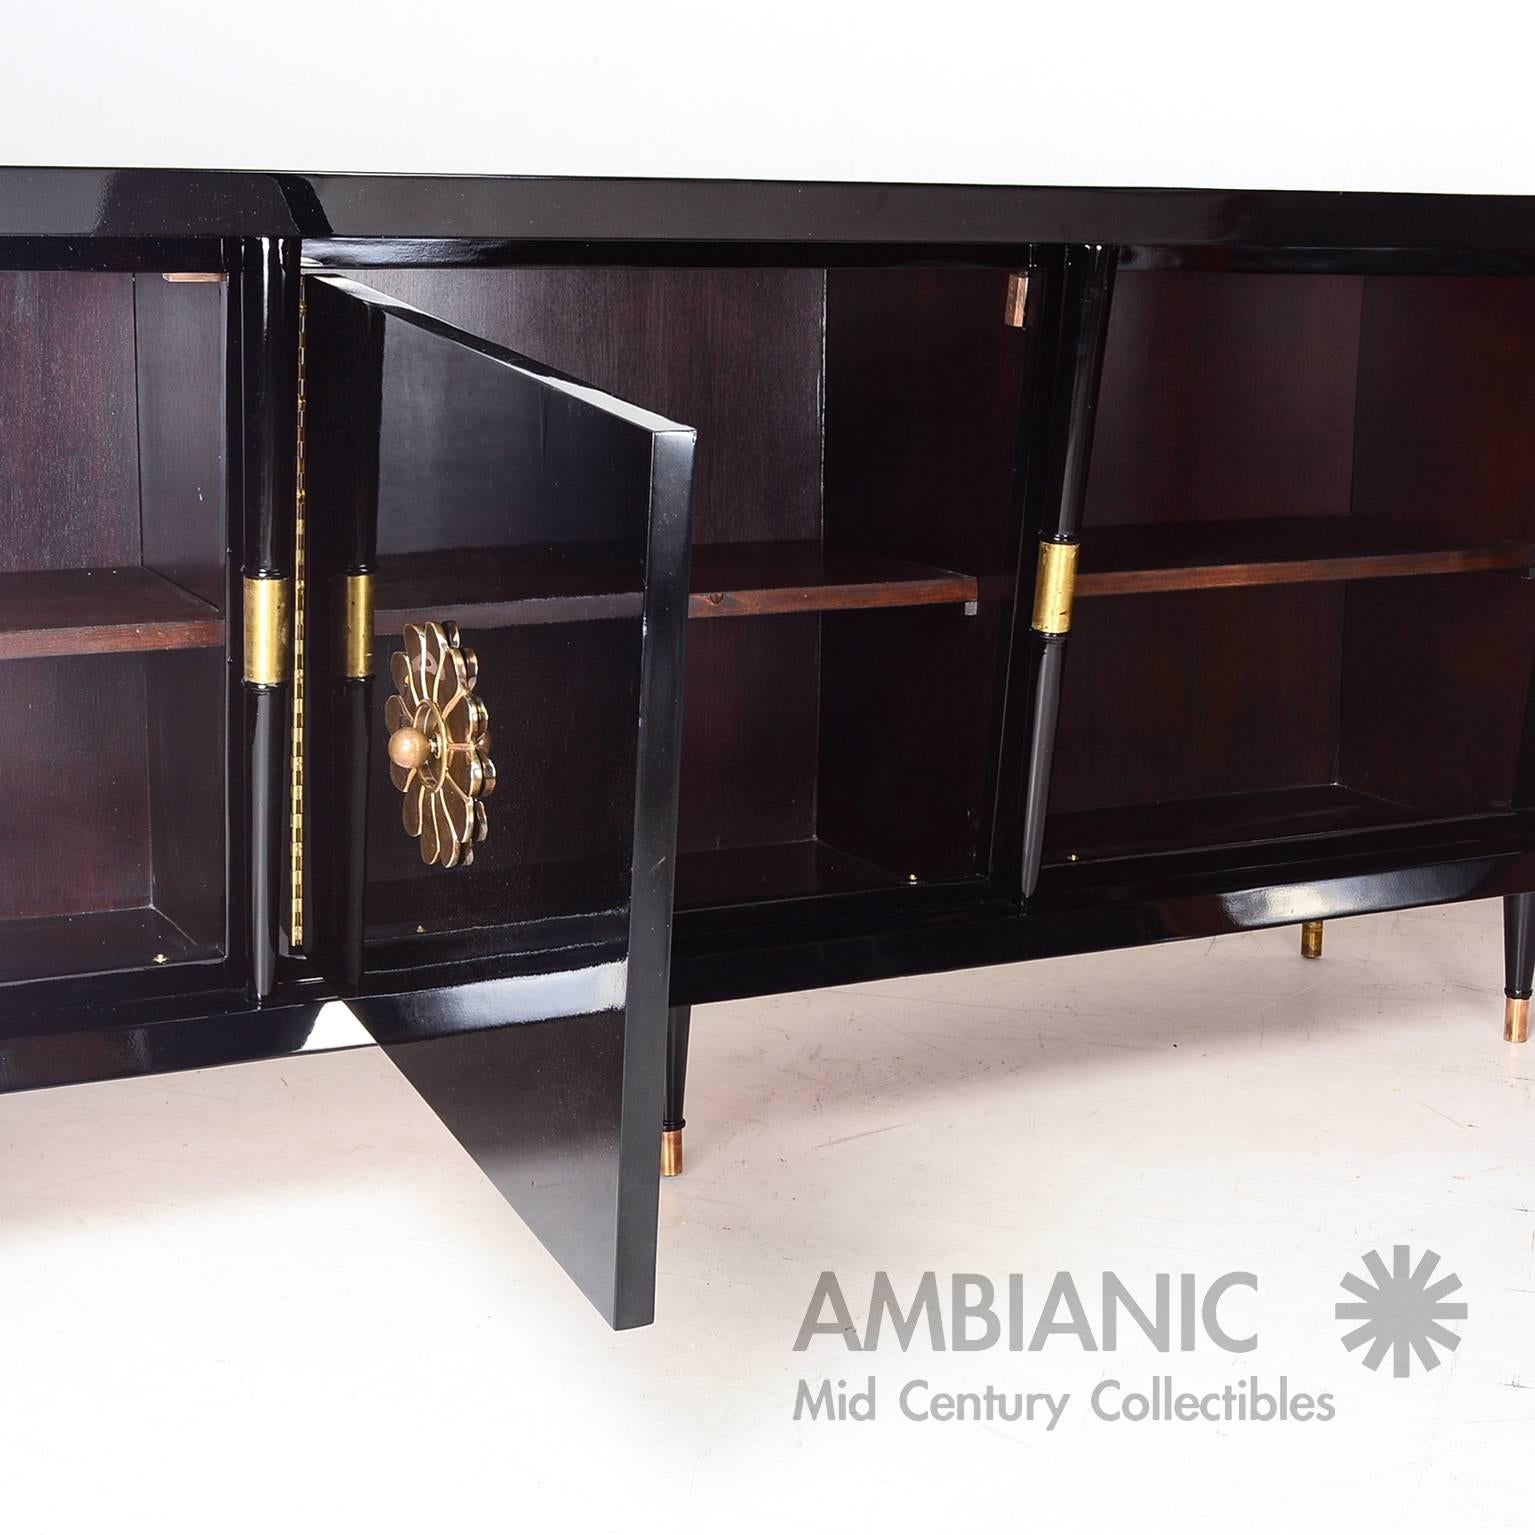 Mid-Century Modern Mexican Modernist Credenza in Black Lacquer with Brass and Goatskin Accents